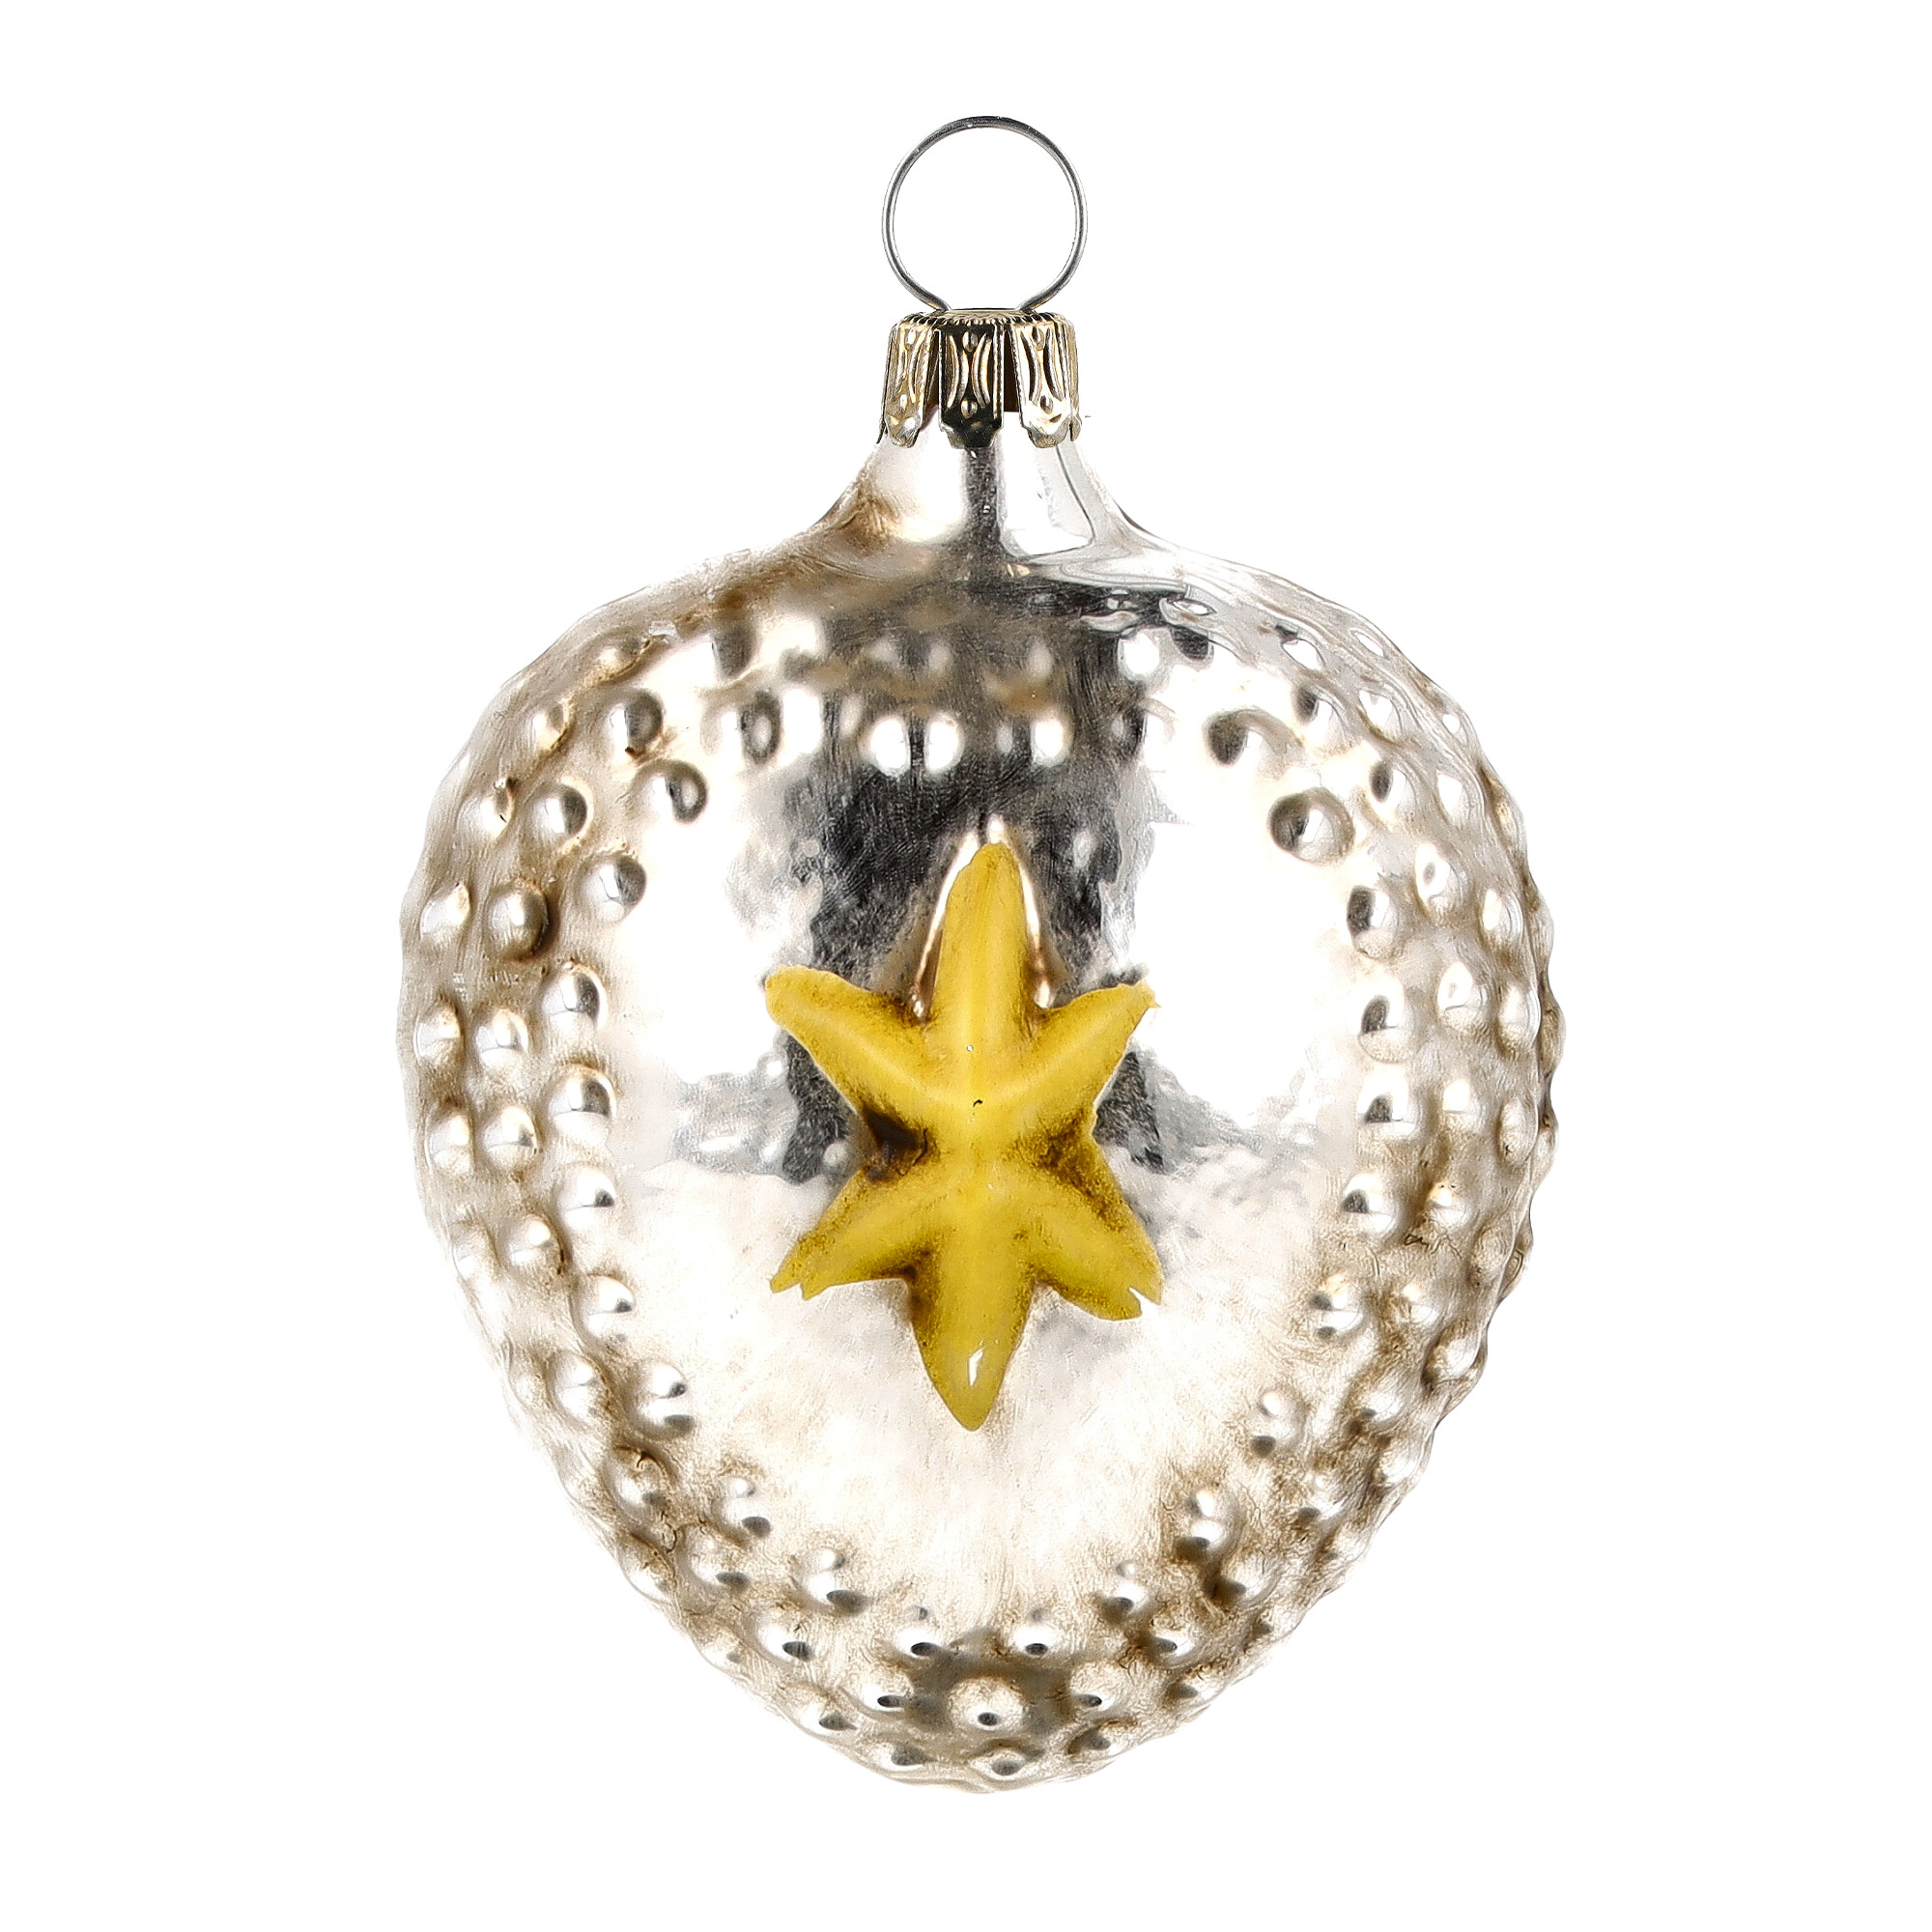 Retro Vintage style Christmas Glass Ornament - Rose heart with knobs and star